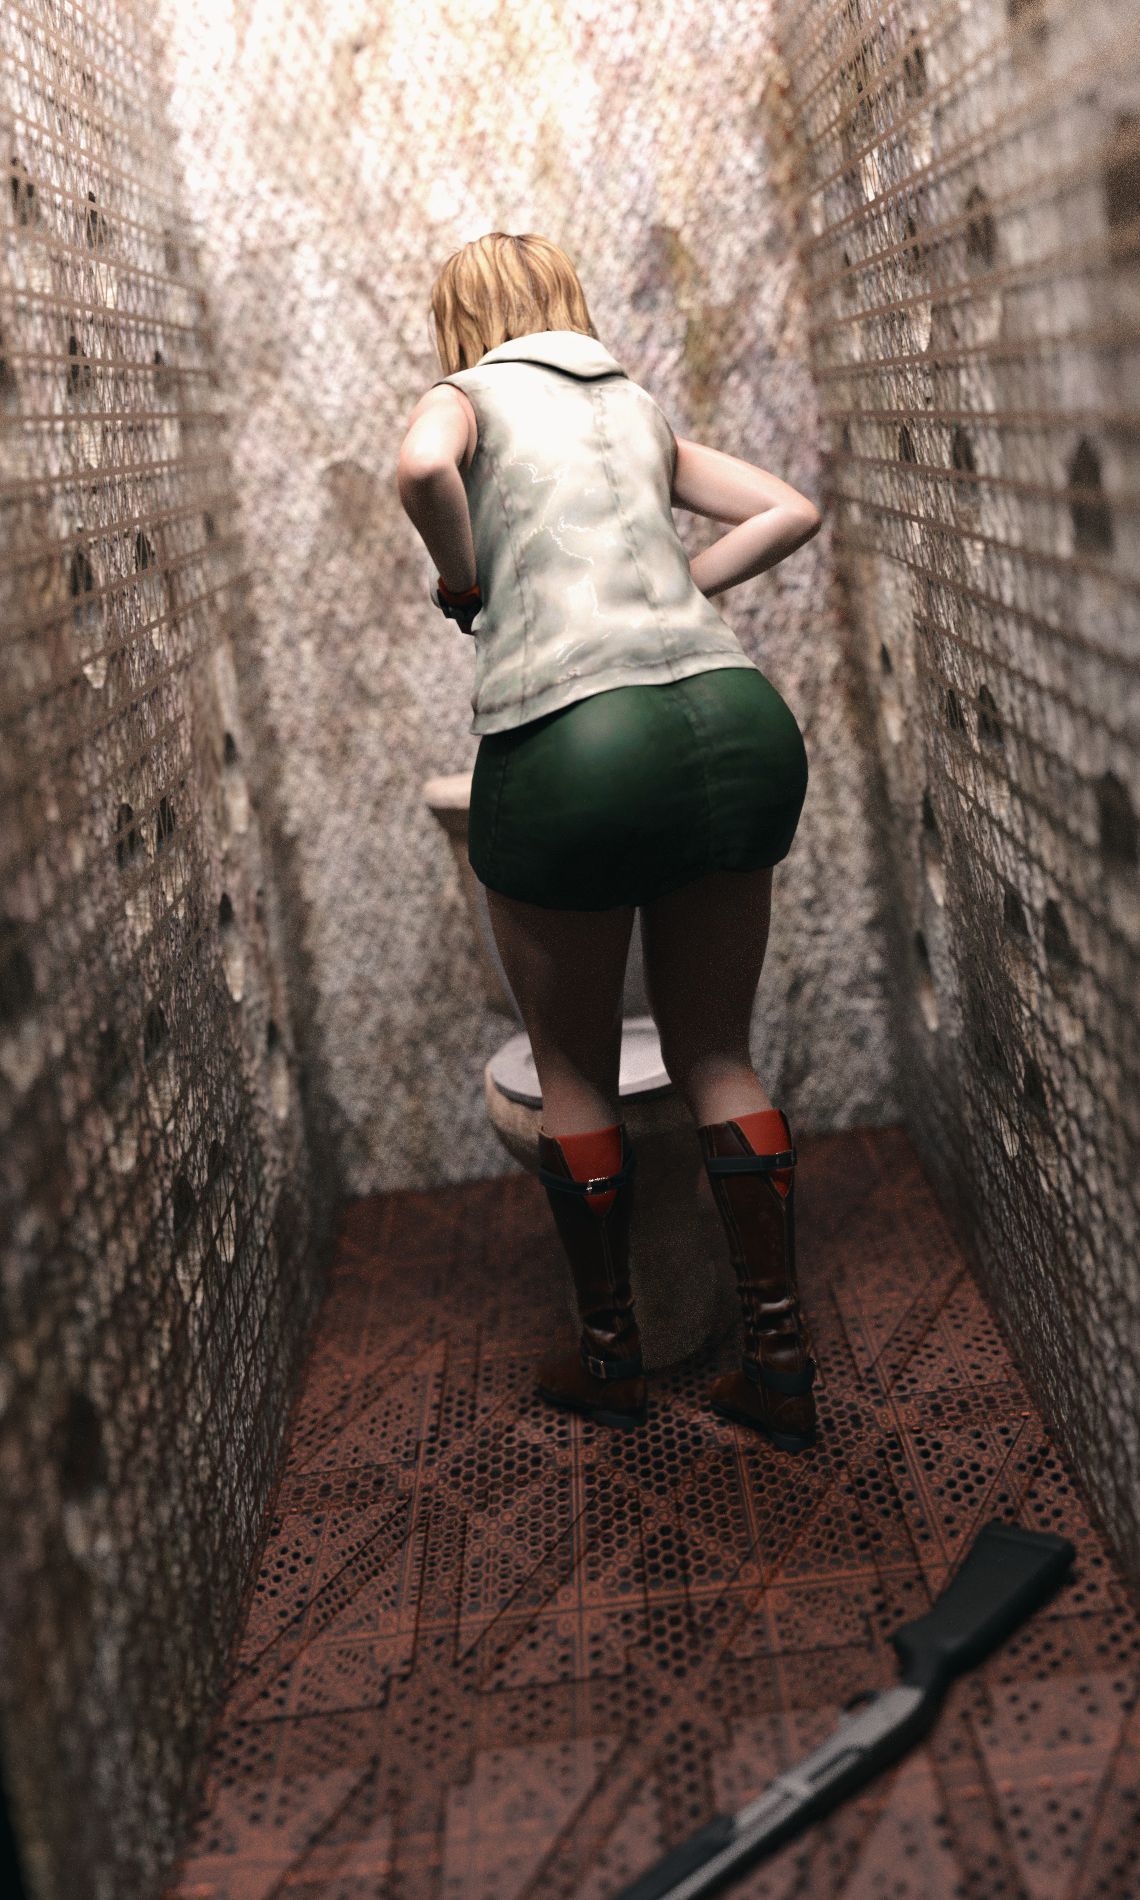 [Renö] Heather at the Gloryholes (Silent Hill) 2